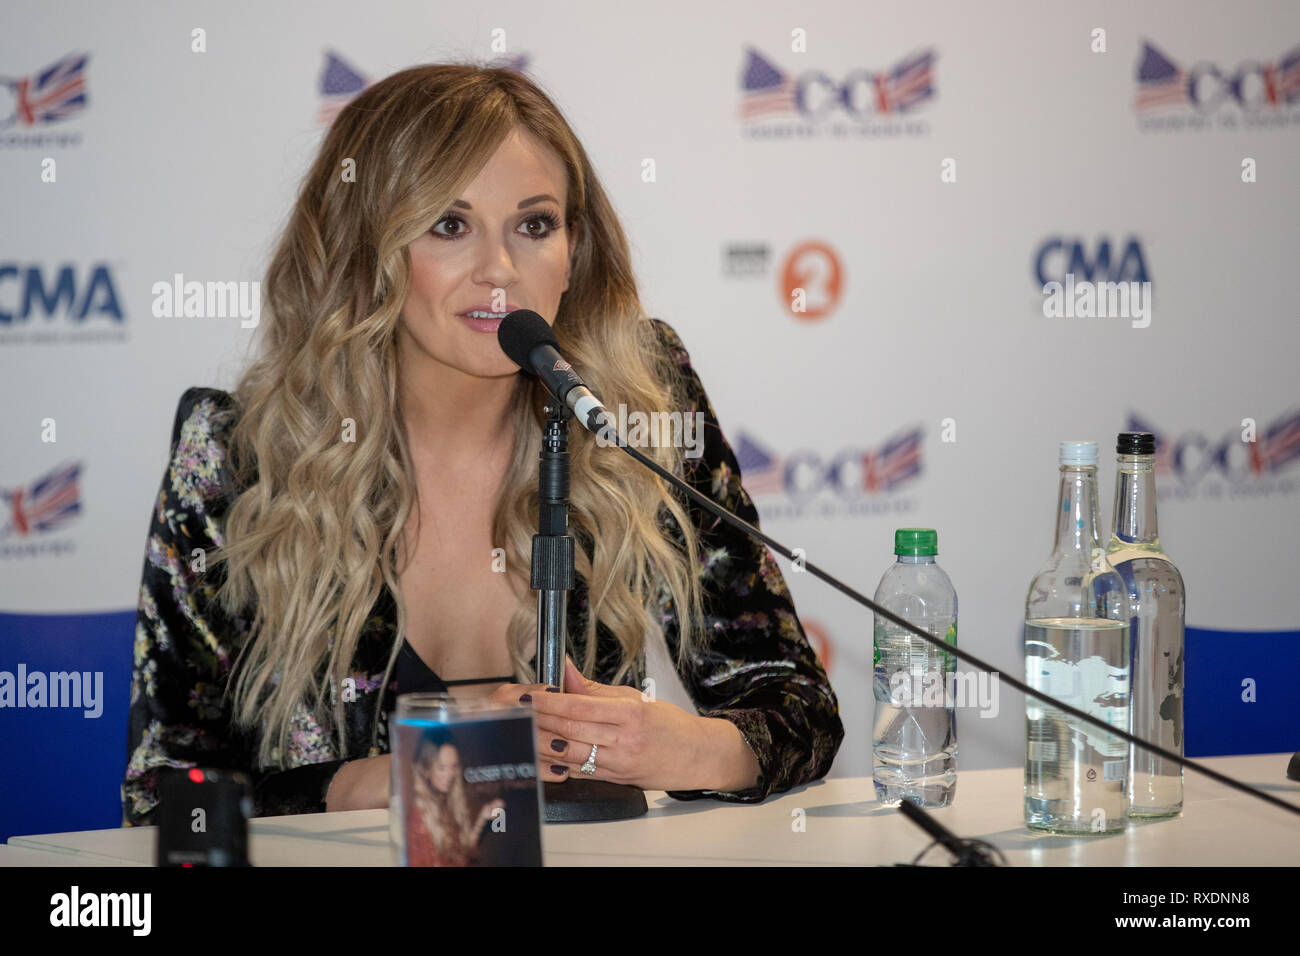 London, UK. 09th Mar, 2019. London, UK. Saturday 9 March 2019.Carly Cristyne Slusser, known as Carly Pearce poses backstage on day 1 of C2C - Country 2 Country festival at O2 Arena, Credit: Jason Richardson/Alamy Live News Stock Photo